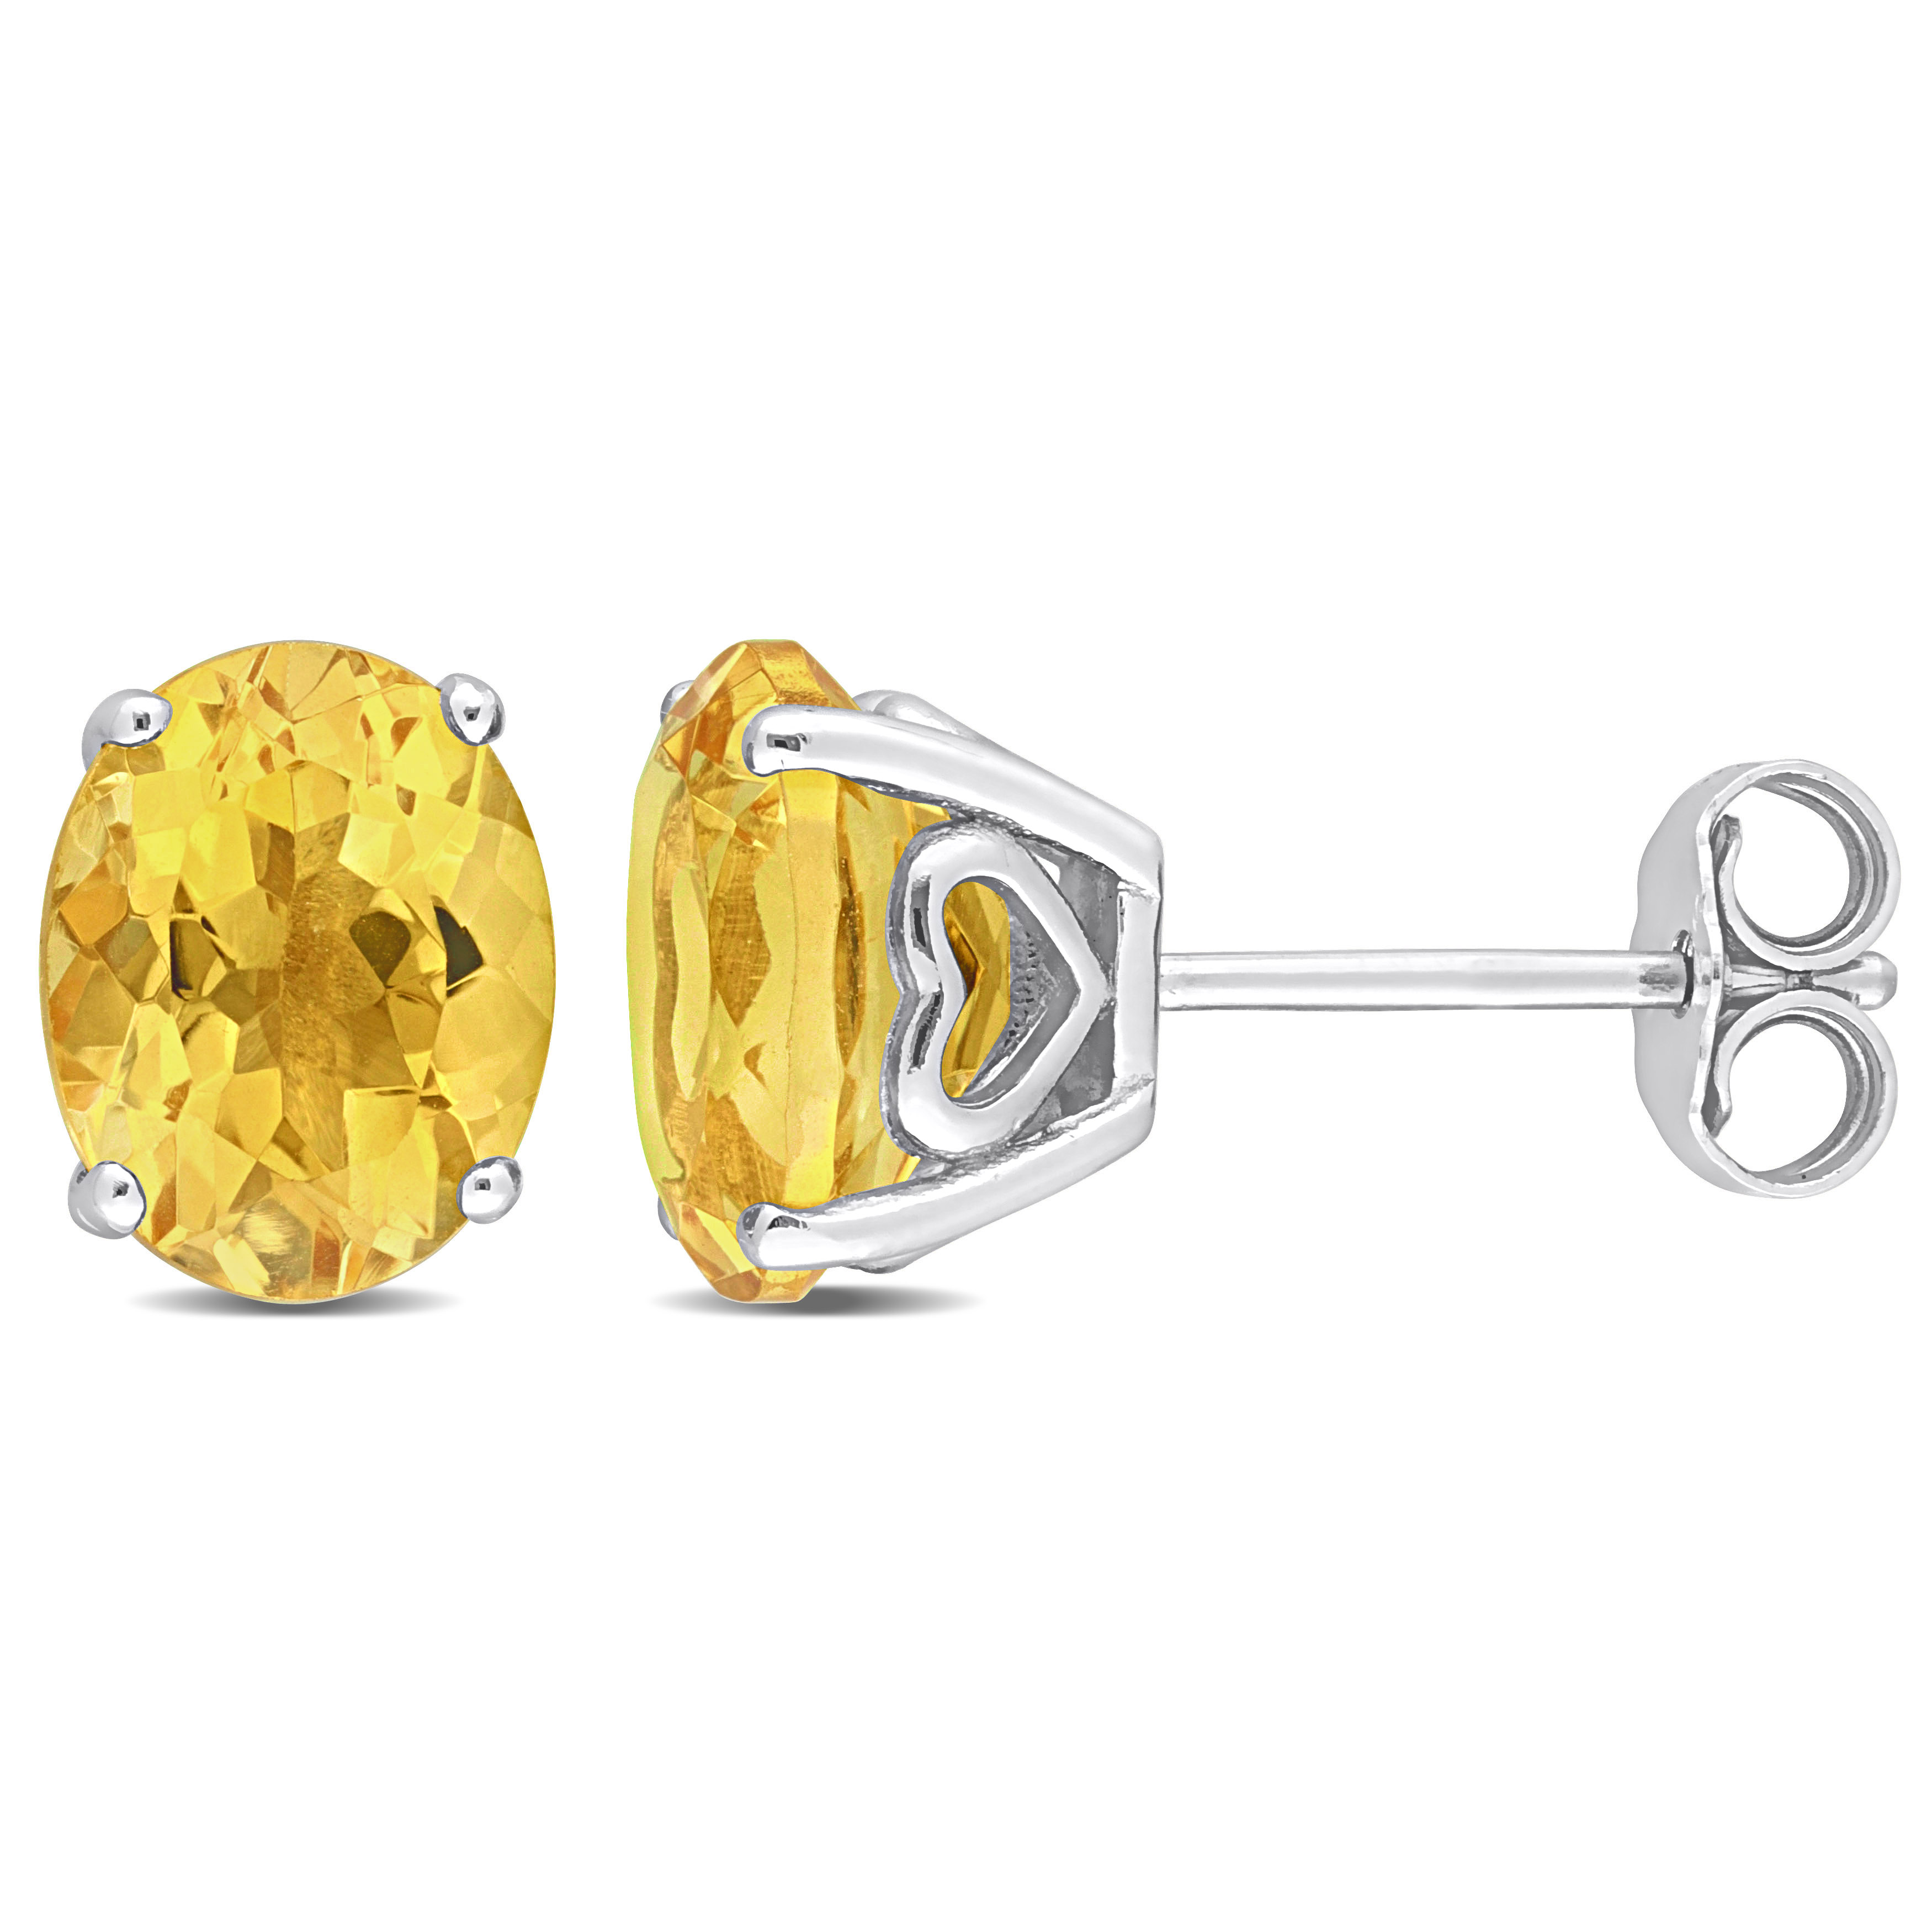 3 1/3 CT TGW Oval Citrine Stud Earrings with Heart Design in Sterling Silver